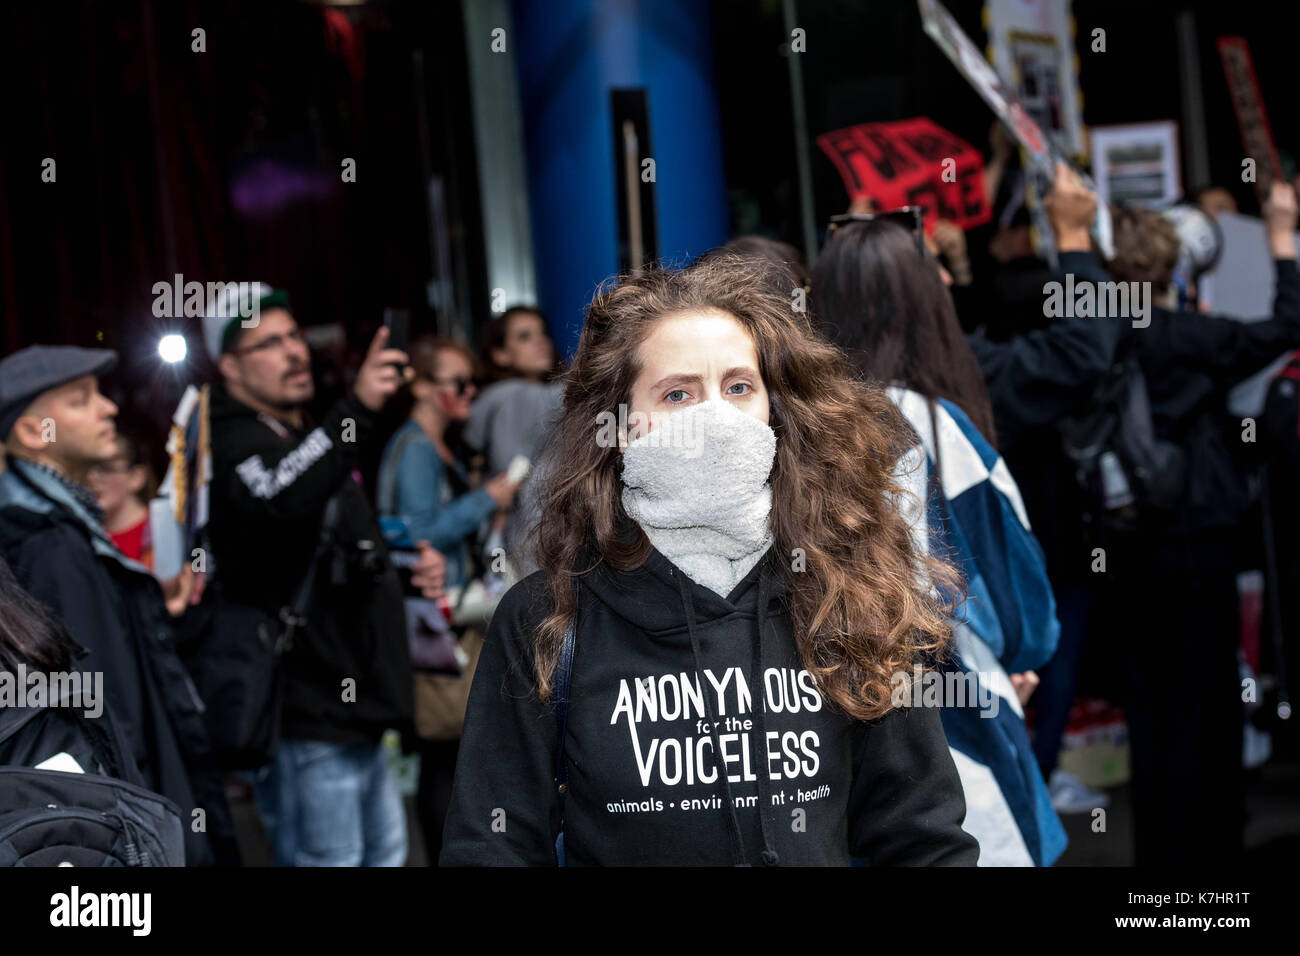 London 16th September 2017, Anti fur protesters picket the Gareth Pugh LFW17 presentation at the BFI IMAZ Some protesters were masked Credit: Ian Davidson/Alamy Live News Stock Photo